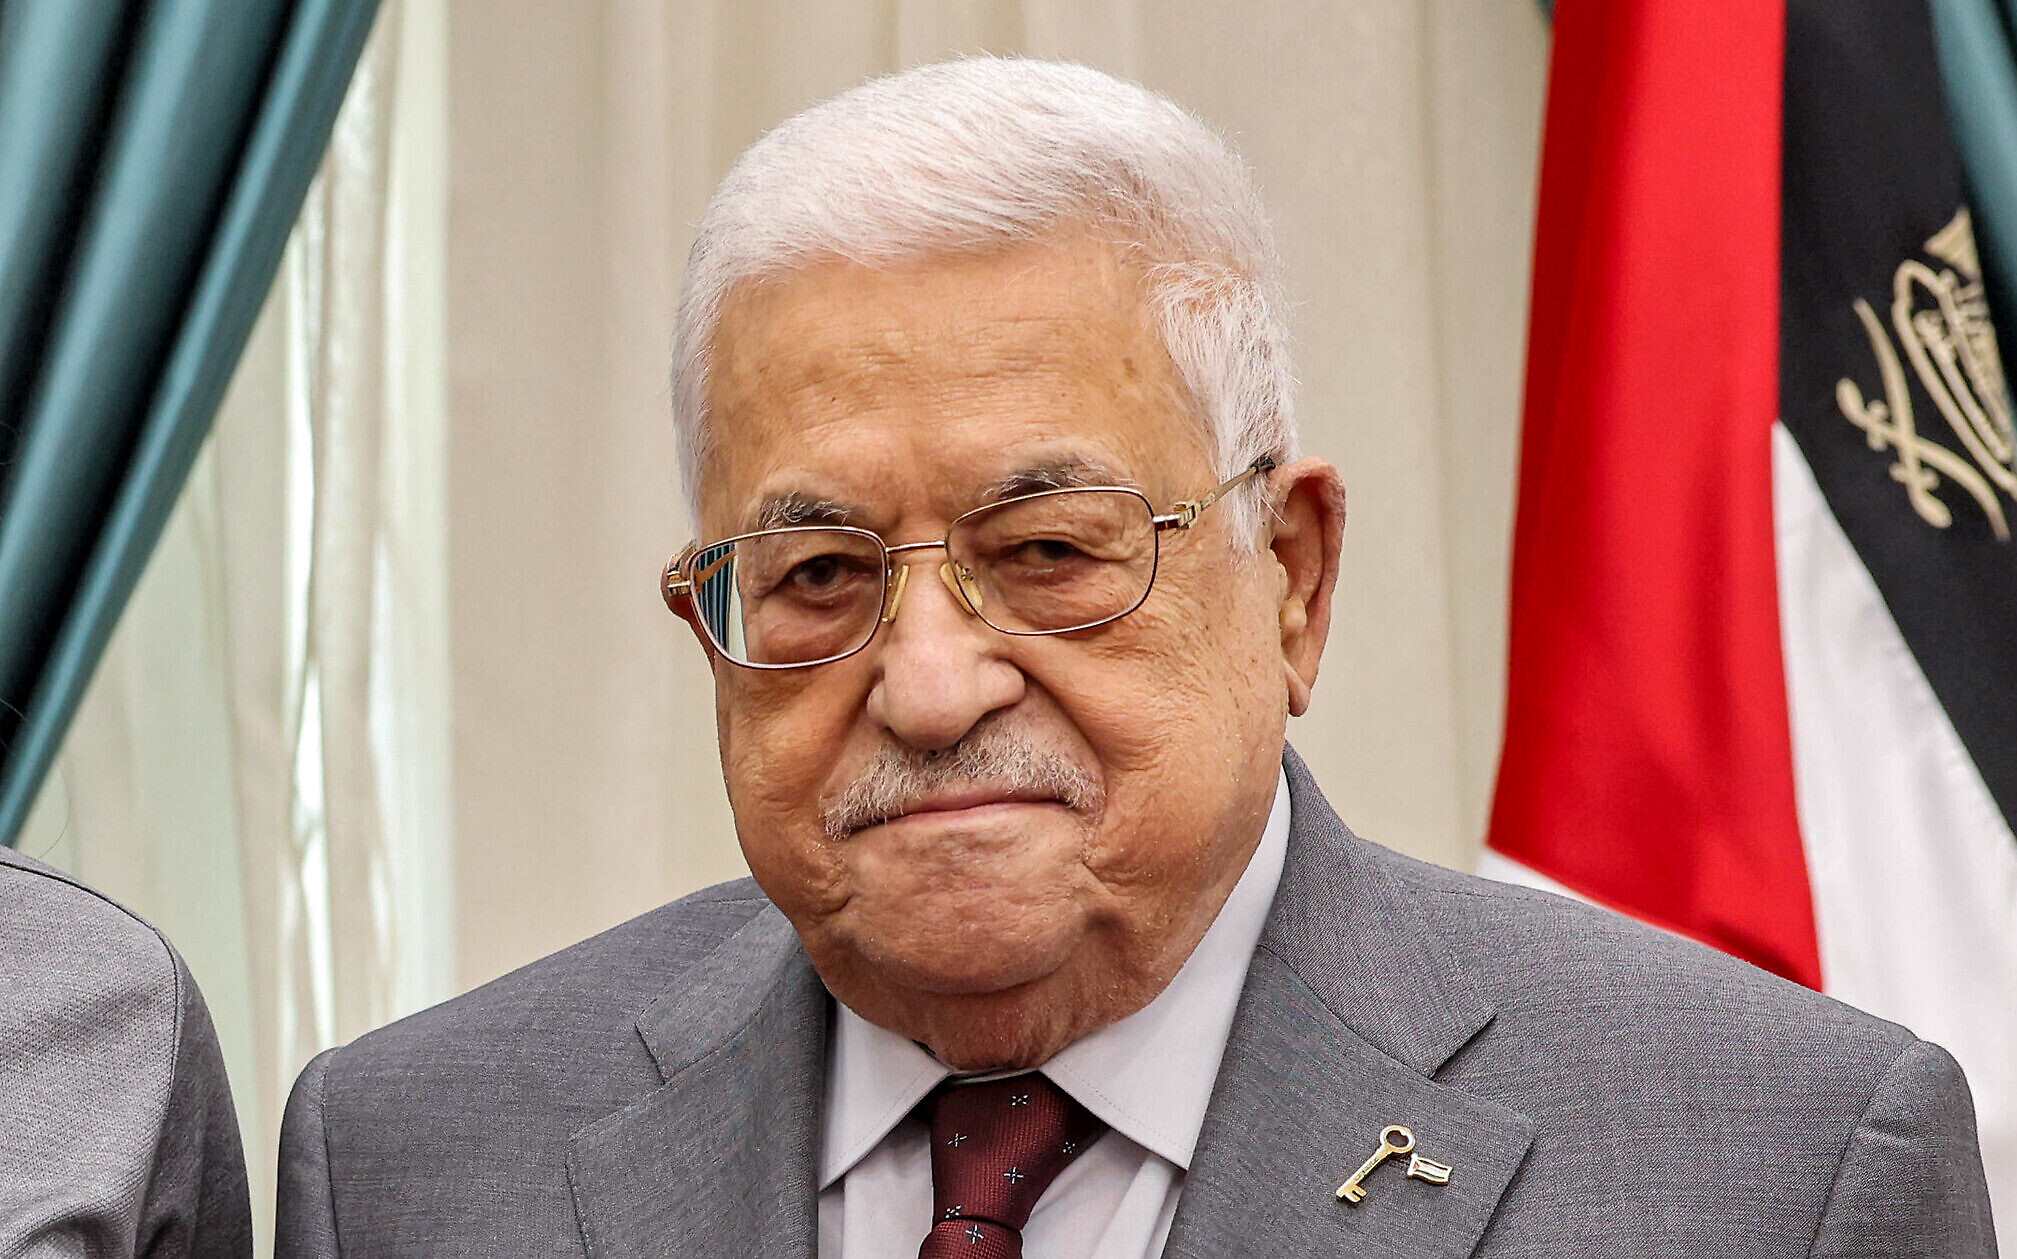 15-fascinating-facts-about-mahmoud-abbas